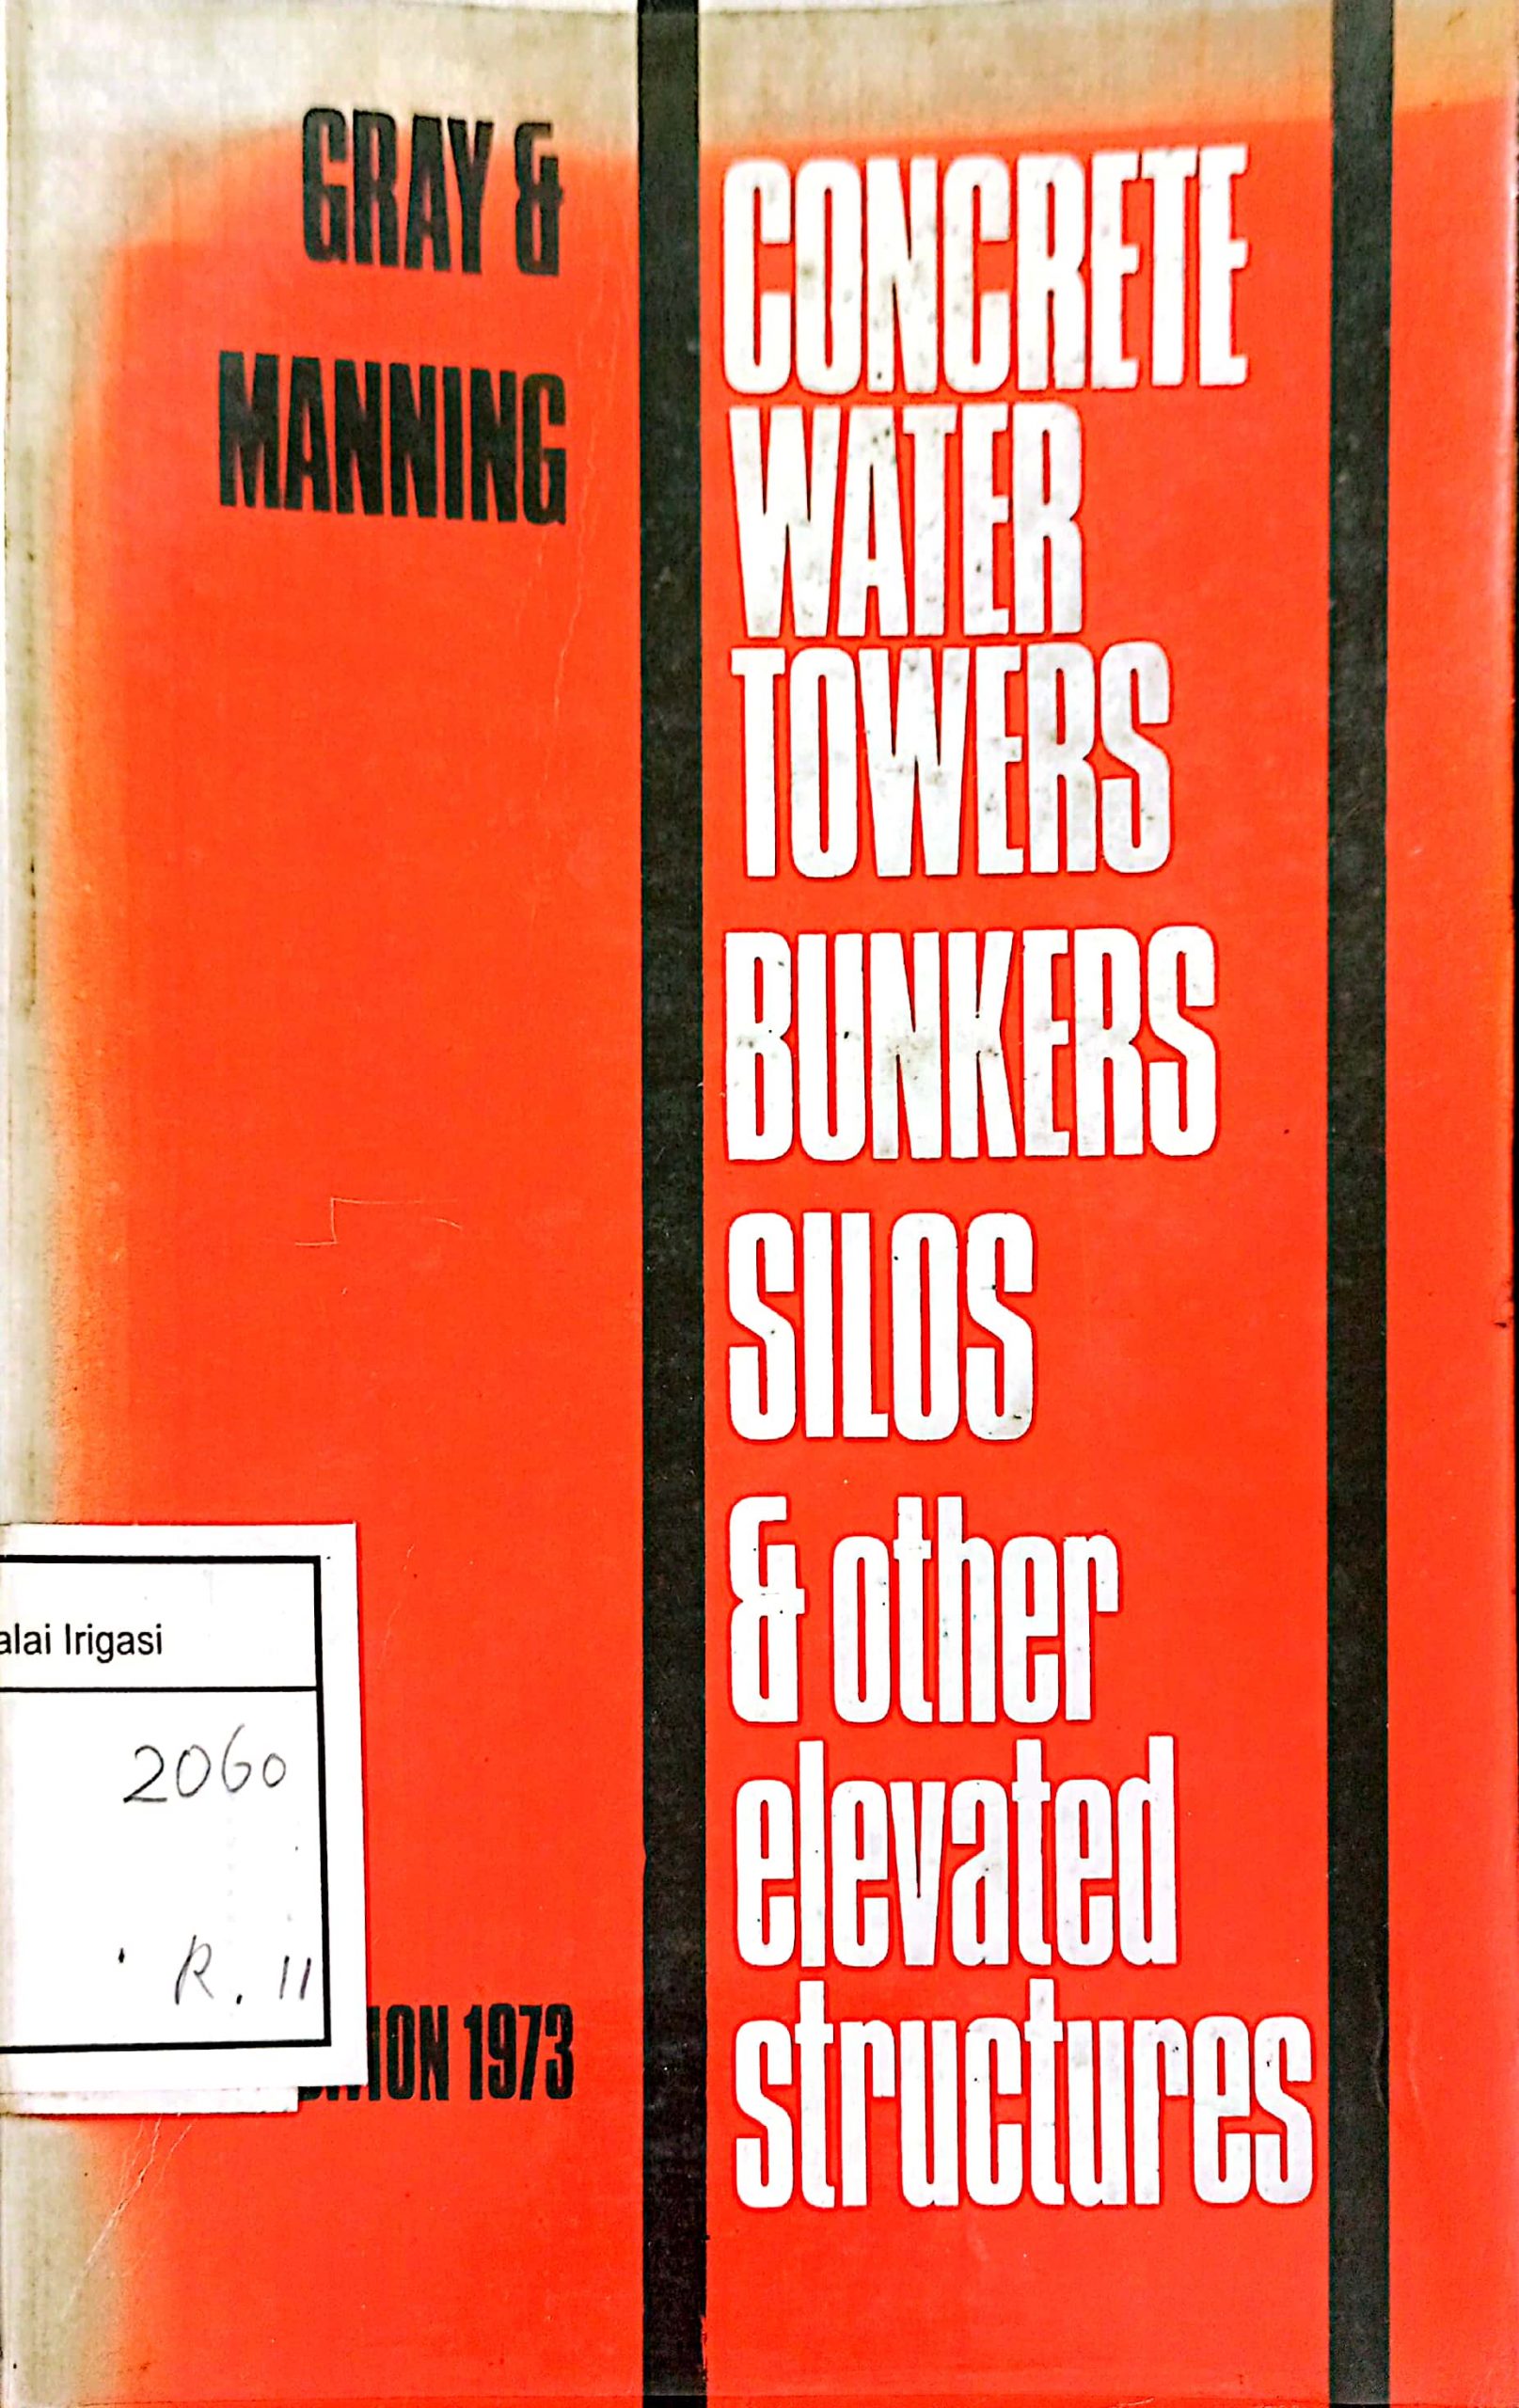 Concrete Water Towers & Other Elevated Structures